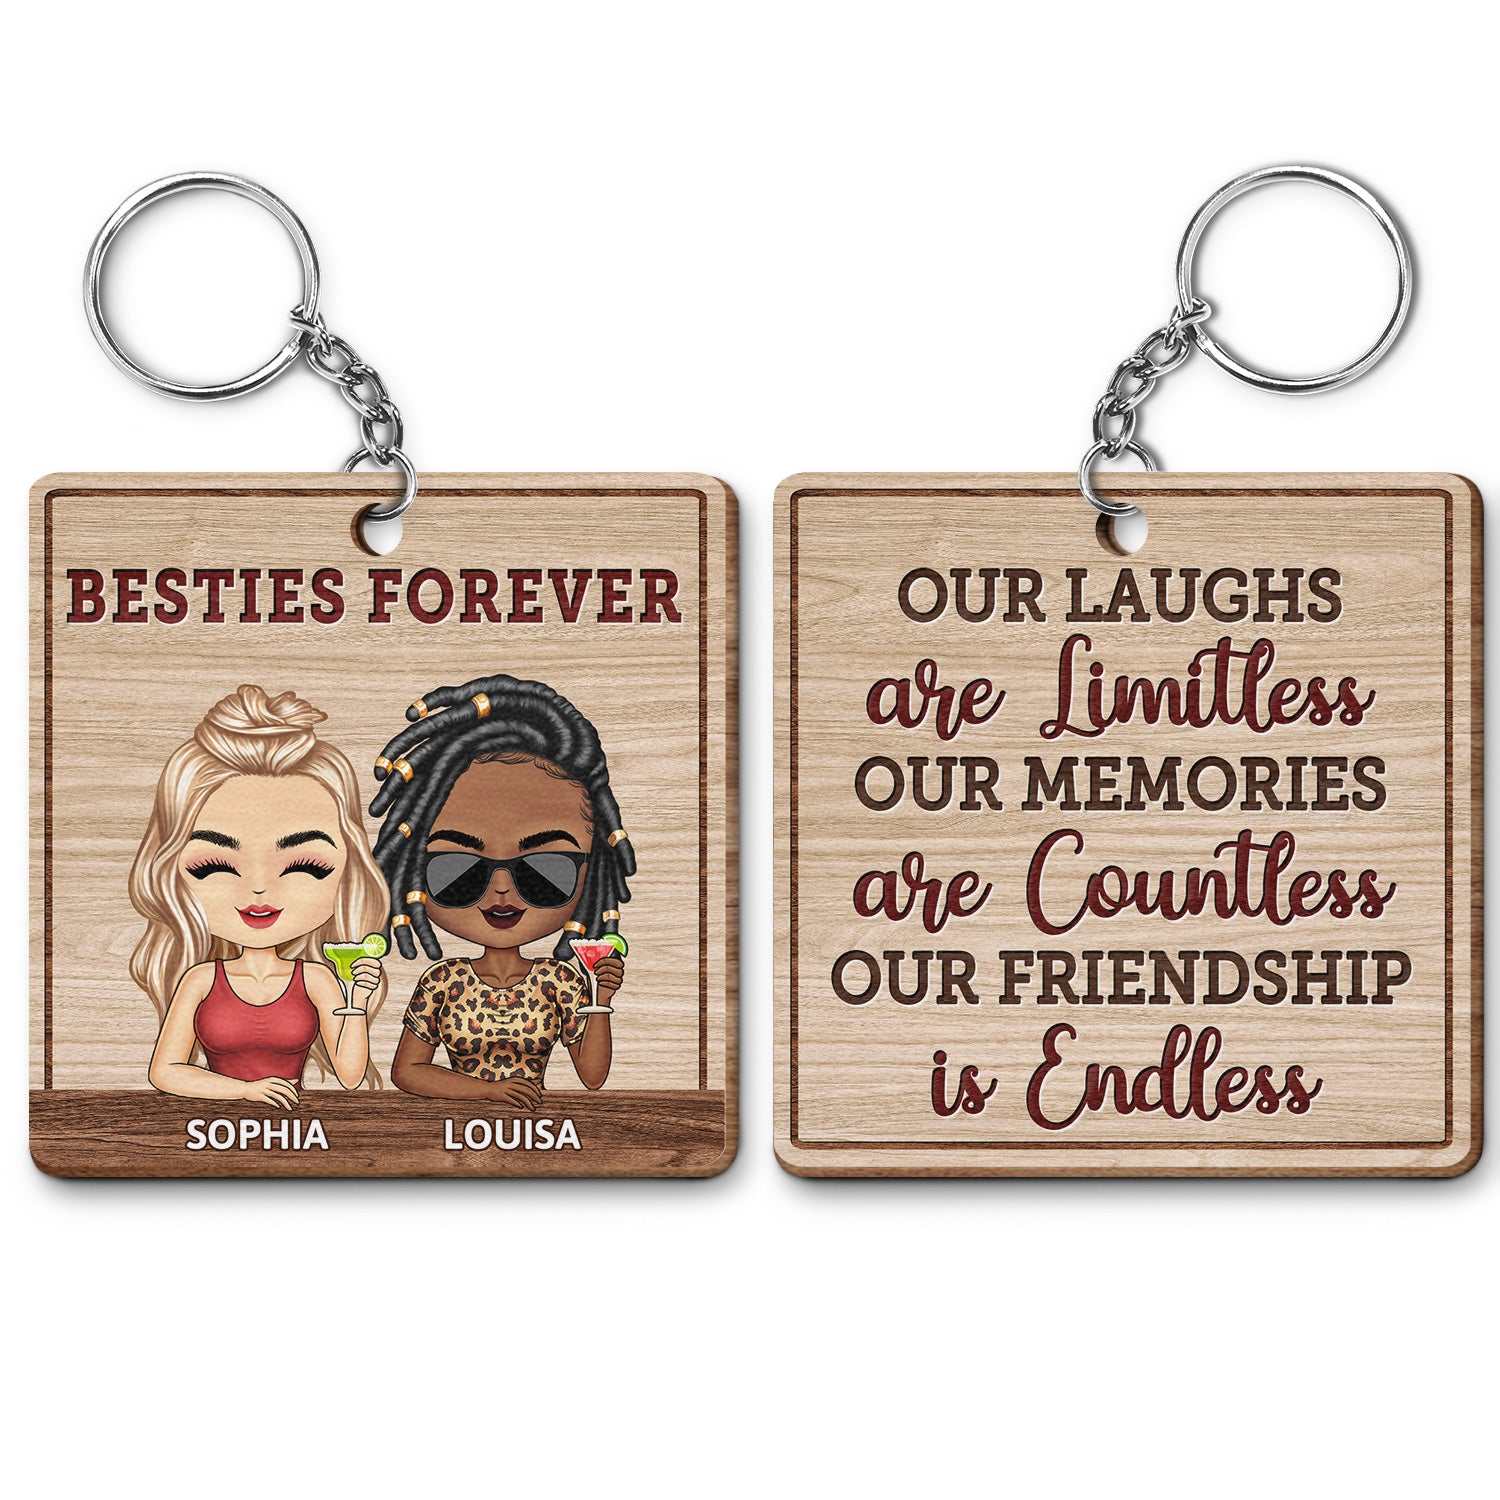 Our Laughs Are Limitless - Funny, Anniversary, Birthday Gifts For Best Friends, Besties - Personalized Custom Wooden Keychain